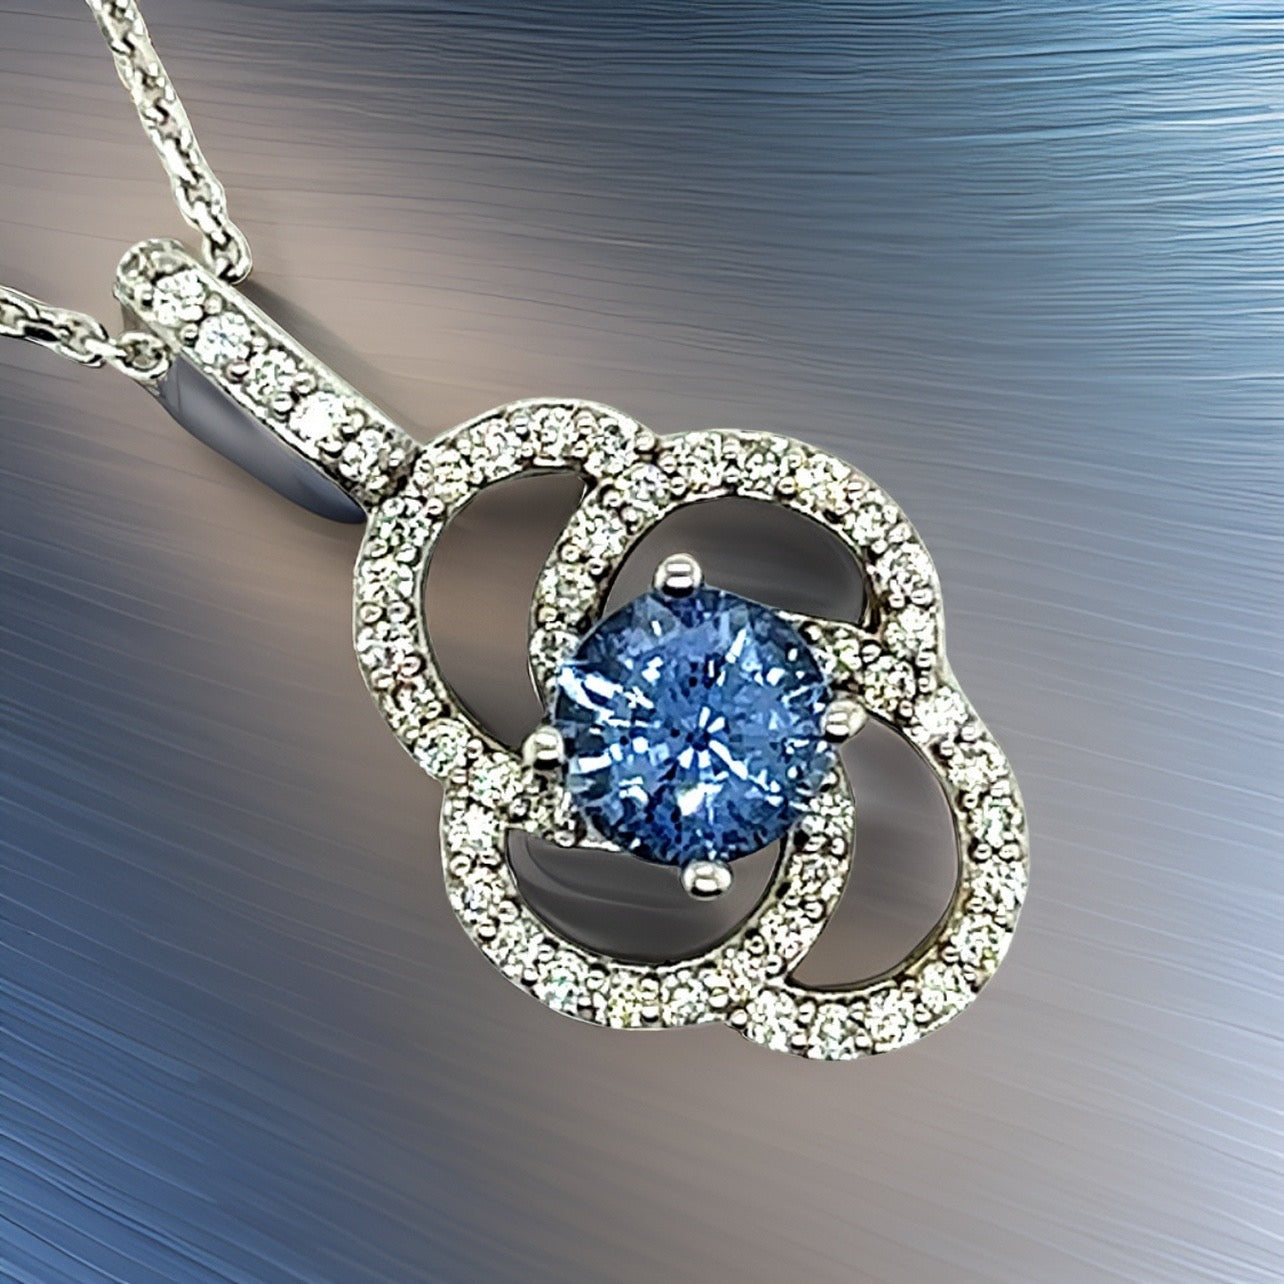 Natural Sapphire Diamond Pendant With Chain 17.5" 14k W Gold 2.17 TCW Certified $4,975 216663 - Certified Fine Jewelry